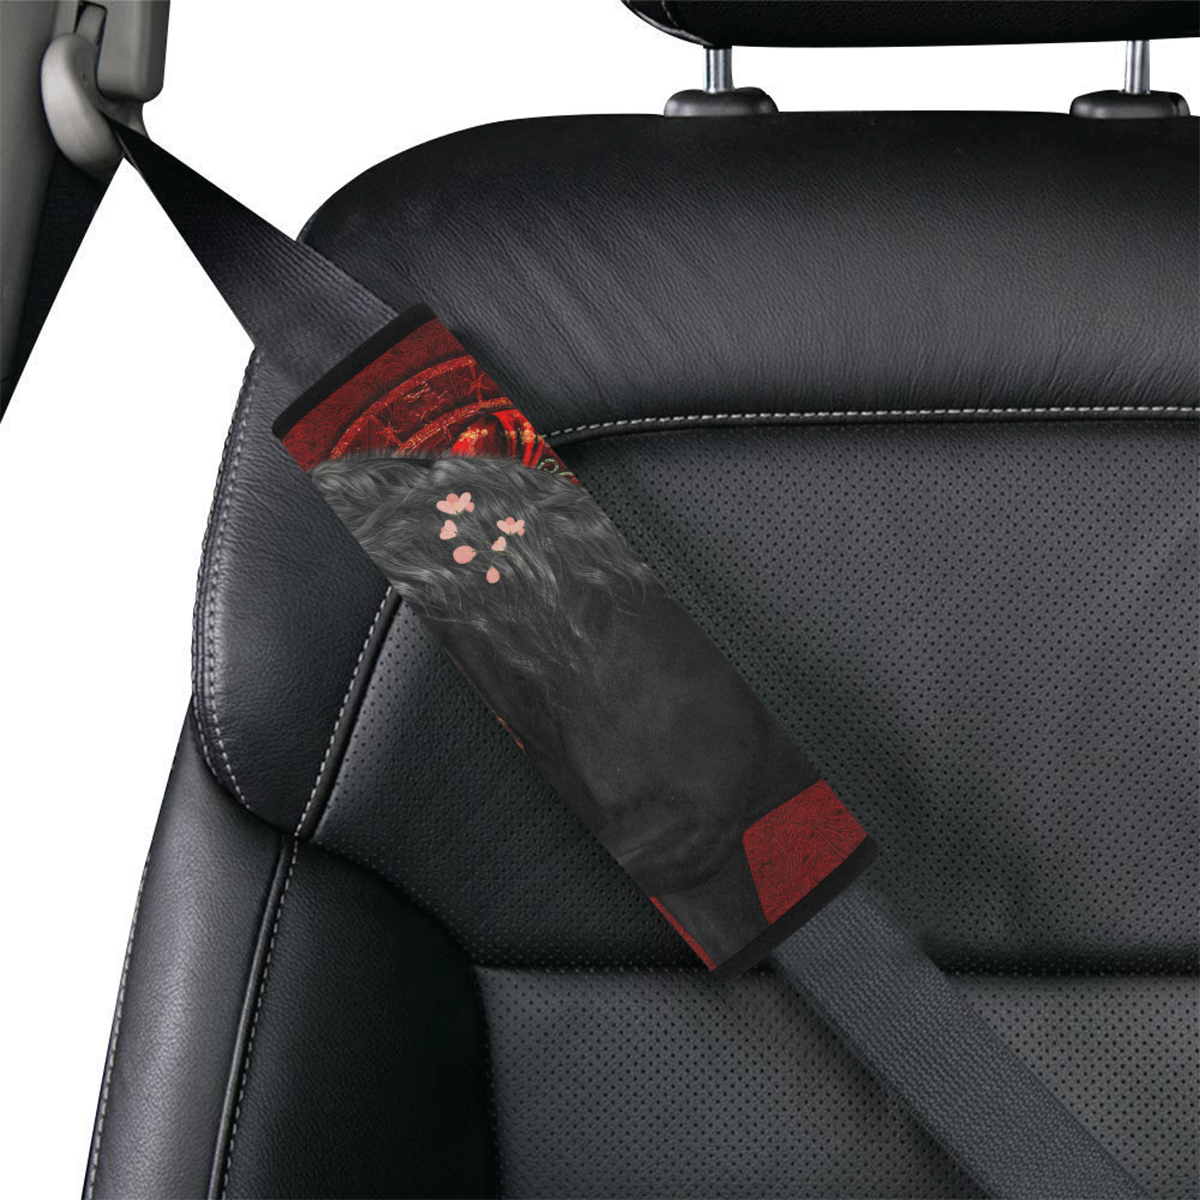 Black horse with flowers Car Seat Belt Cover 7''x8.5''